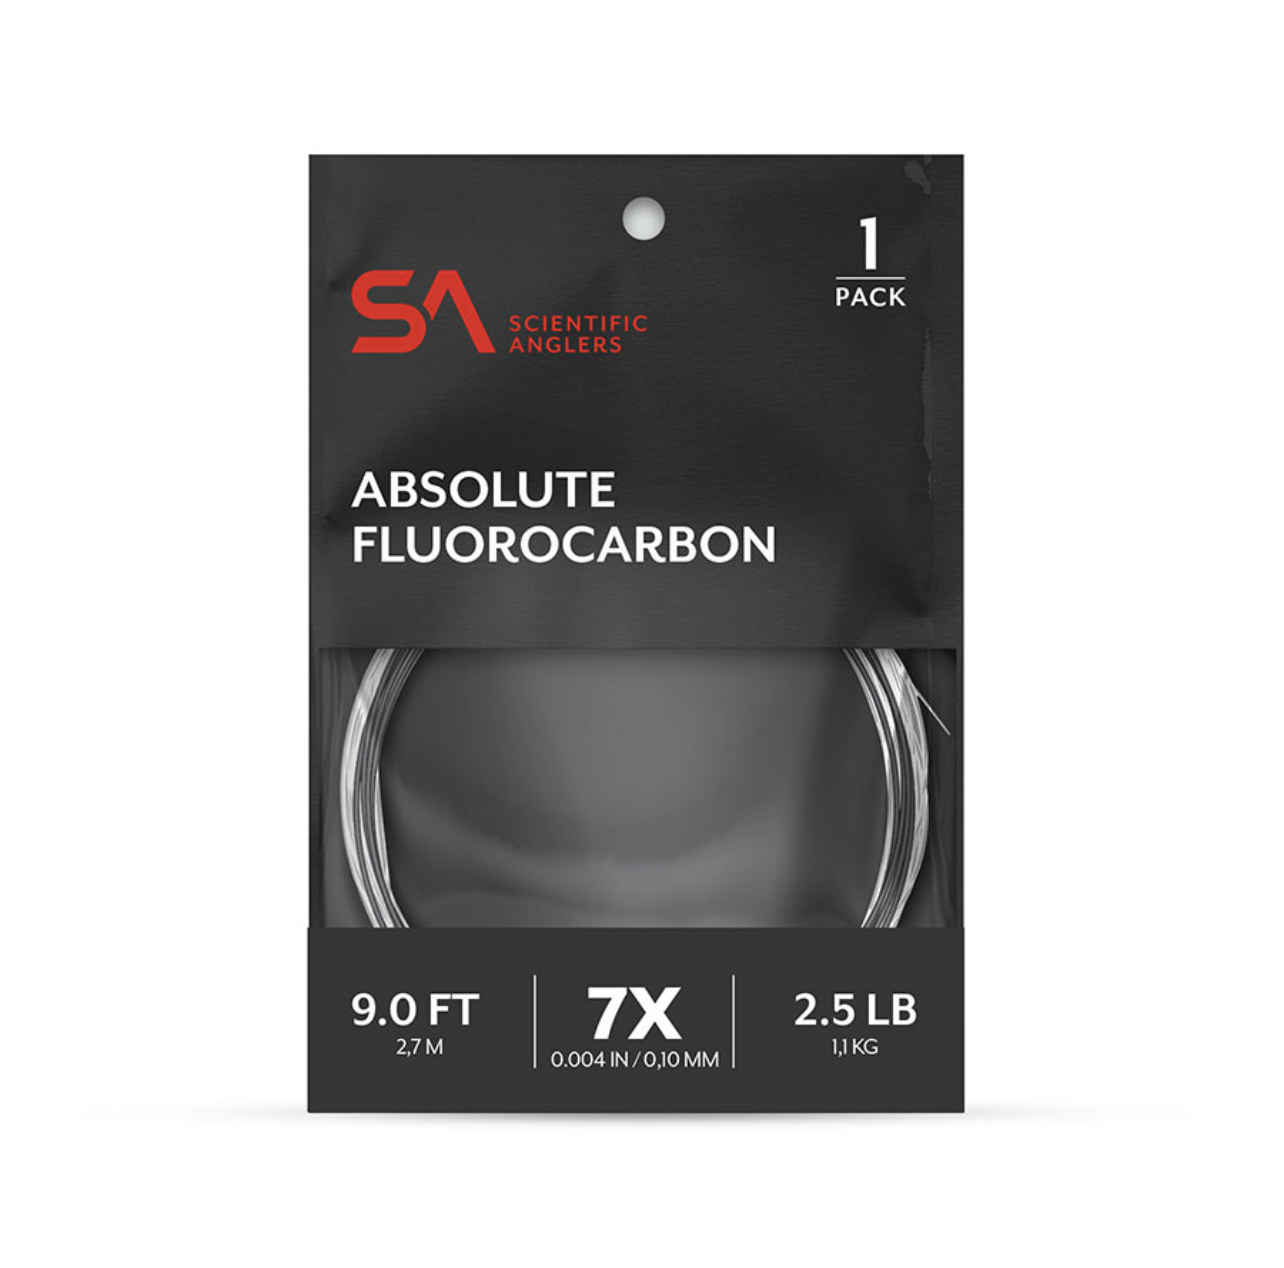 Scientific Anglers Absolute Fluorocarbon Leader - 9ft - 5X - 4.6lb